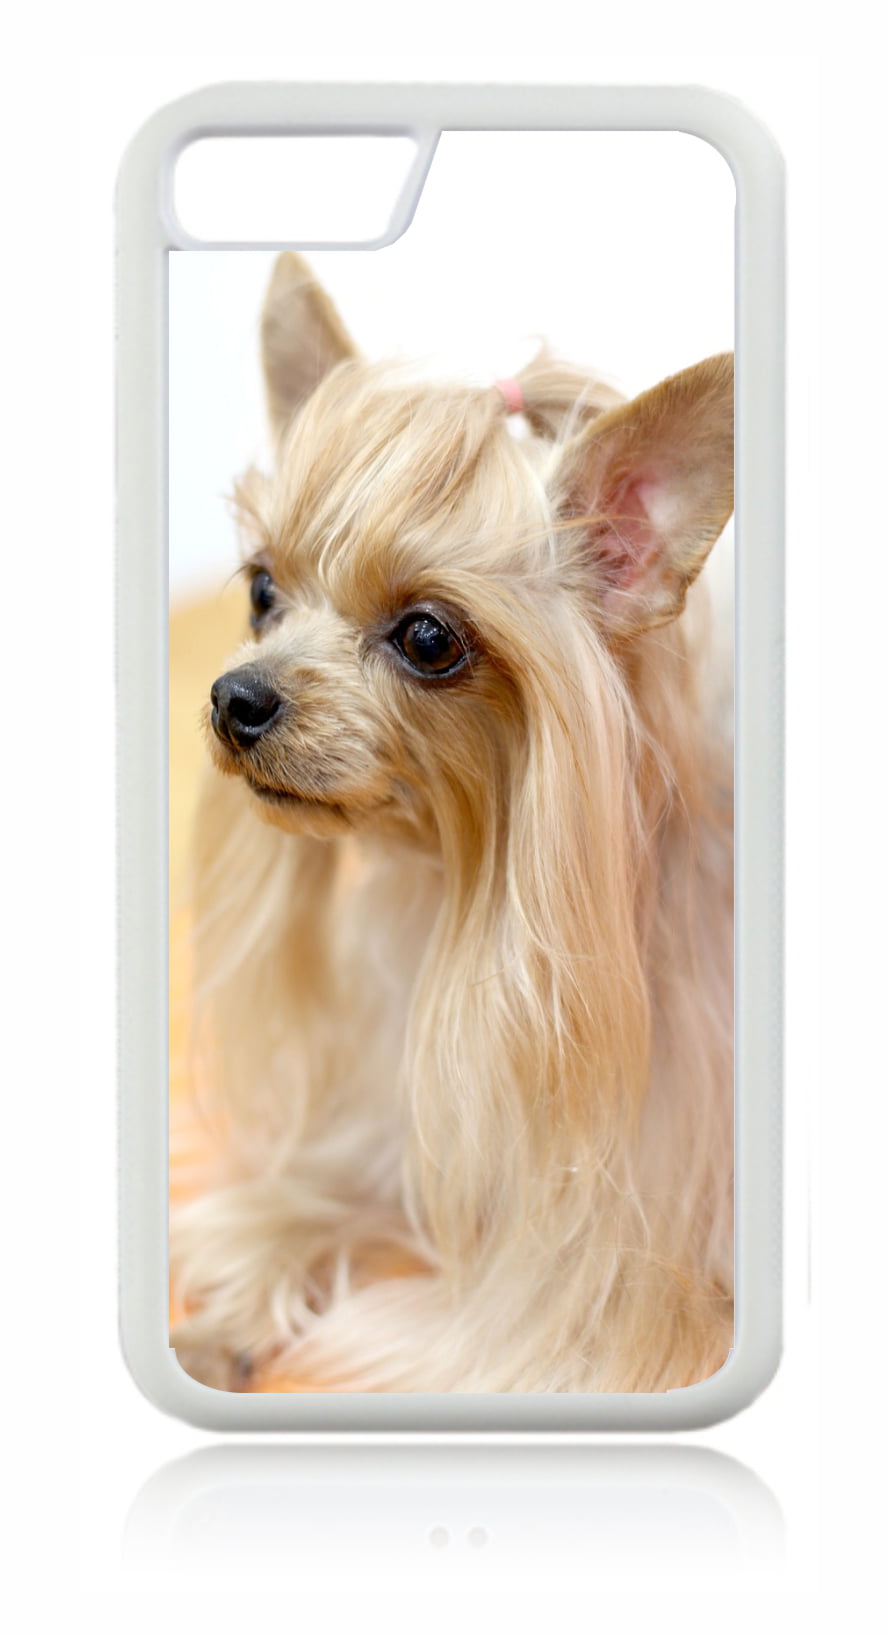 Long Haired Blond Chihuahua Dog Design White Rubber for the Apple iPhone 6 / iPhone 6s - iPhone 6 Accessories - iPhone 6s Accessories - Walmart.com